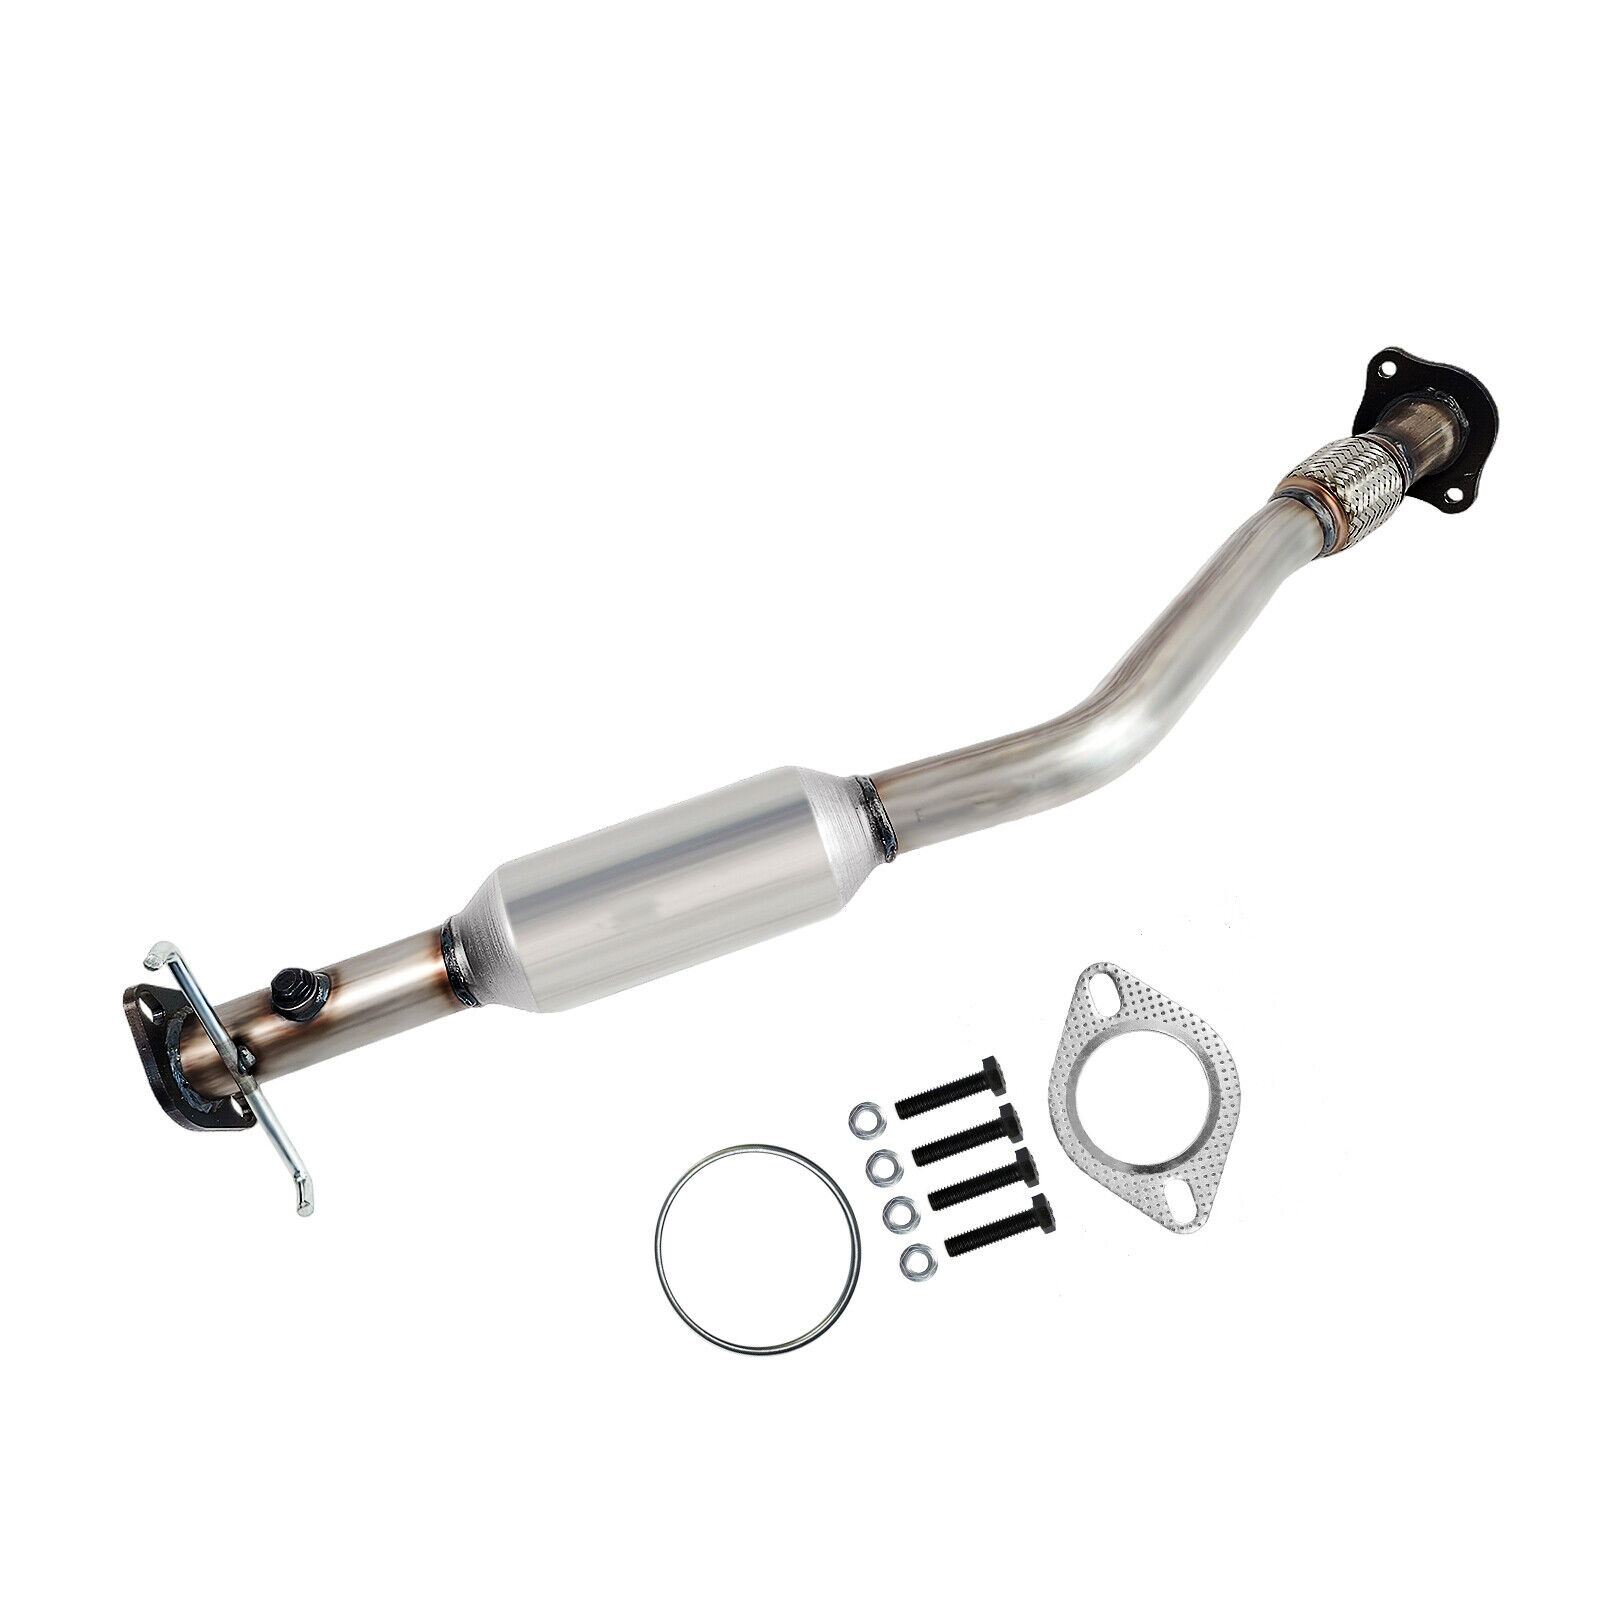 Catalytic Converter for 2000 - 2005 Chevy Impala Monte Carlo 3.4L EPA Direct-Fit